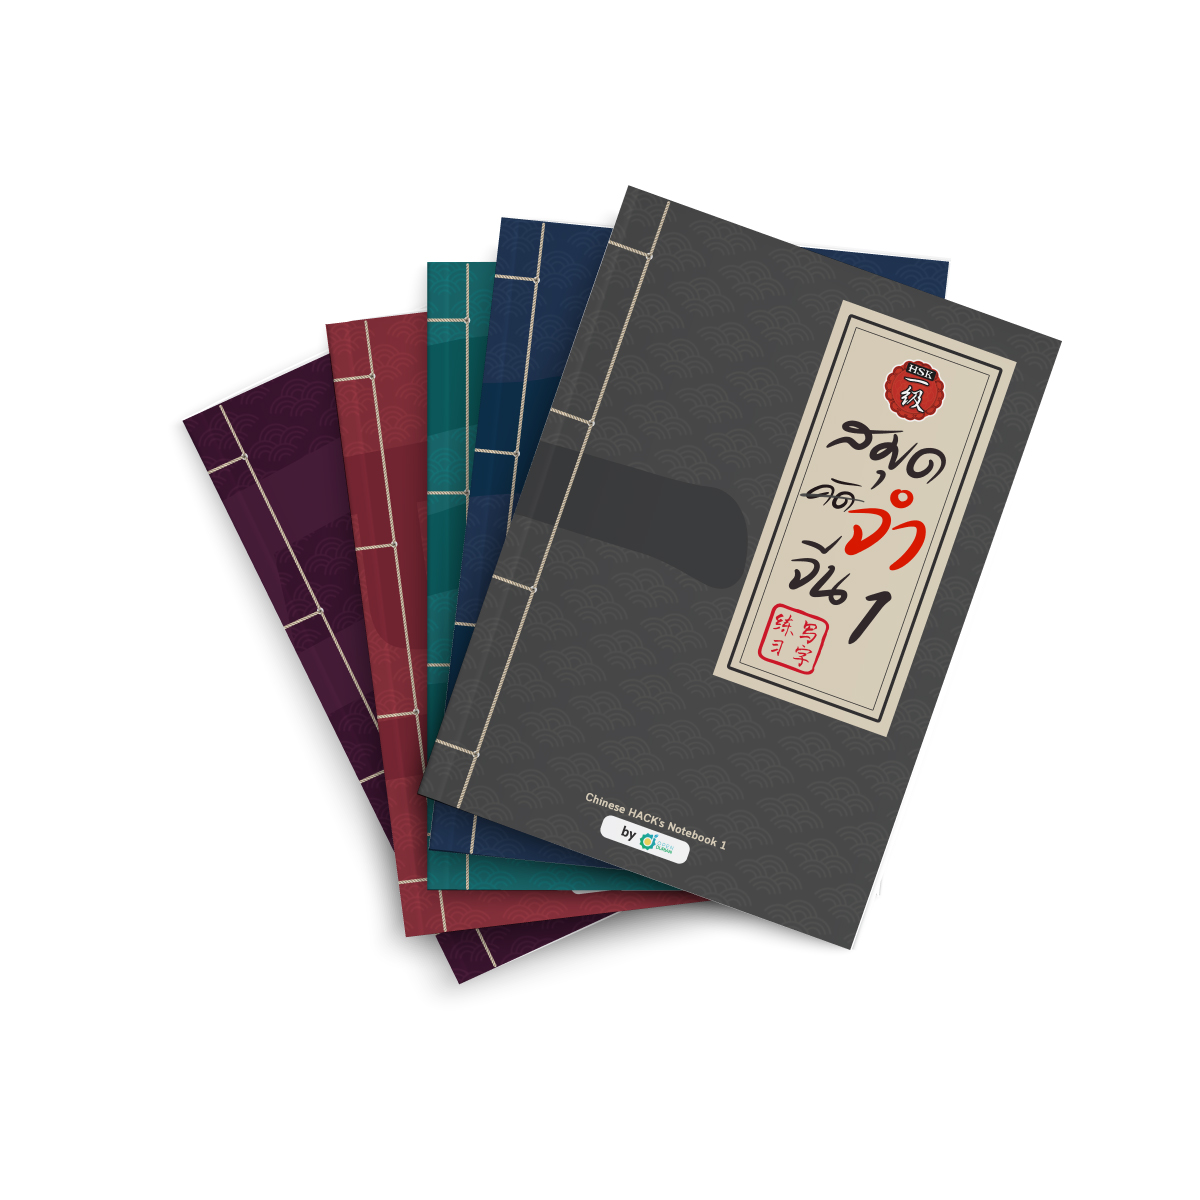 Chinese Hack's Notebooks have 5 different series divined by level of vocabulary and have different color book cover.